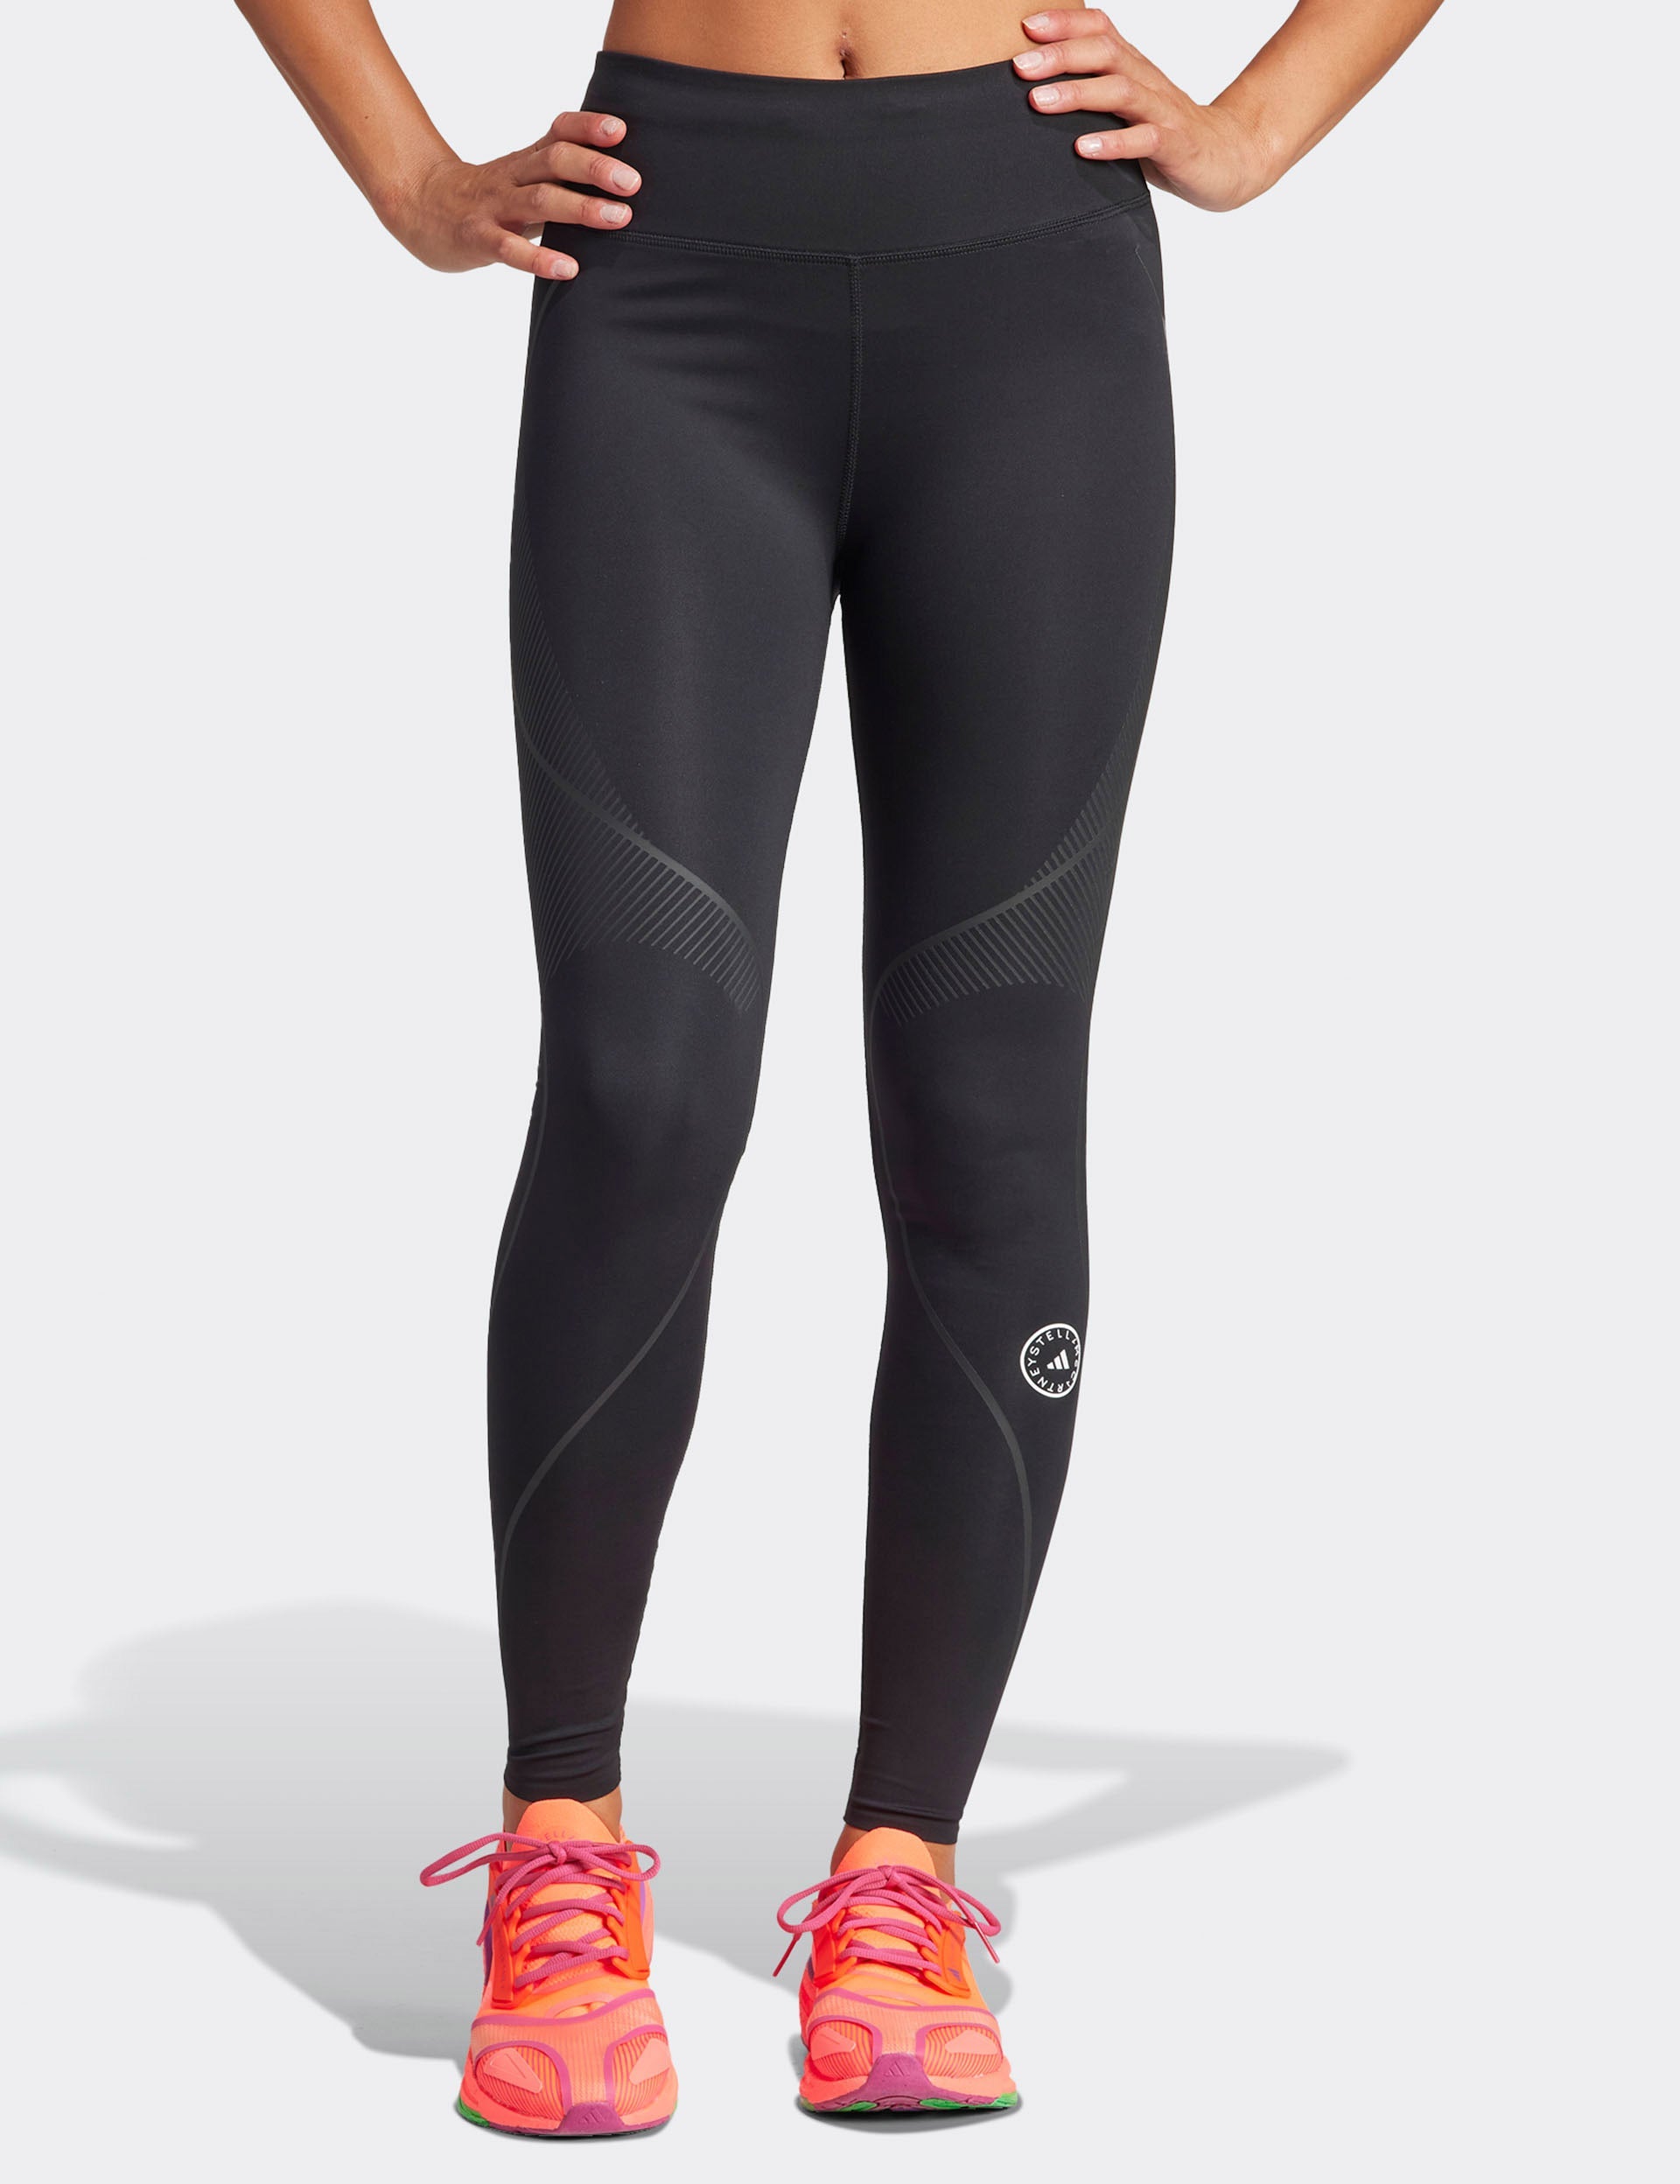 Sport Chek on X: Make sure your gym bag is stocked with everything you  need for a successful workout. From water bottles, sports bras, breathable  tops, leggings, shorts - we have what